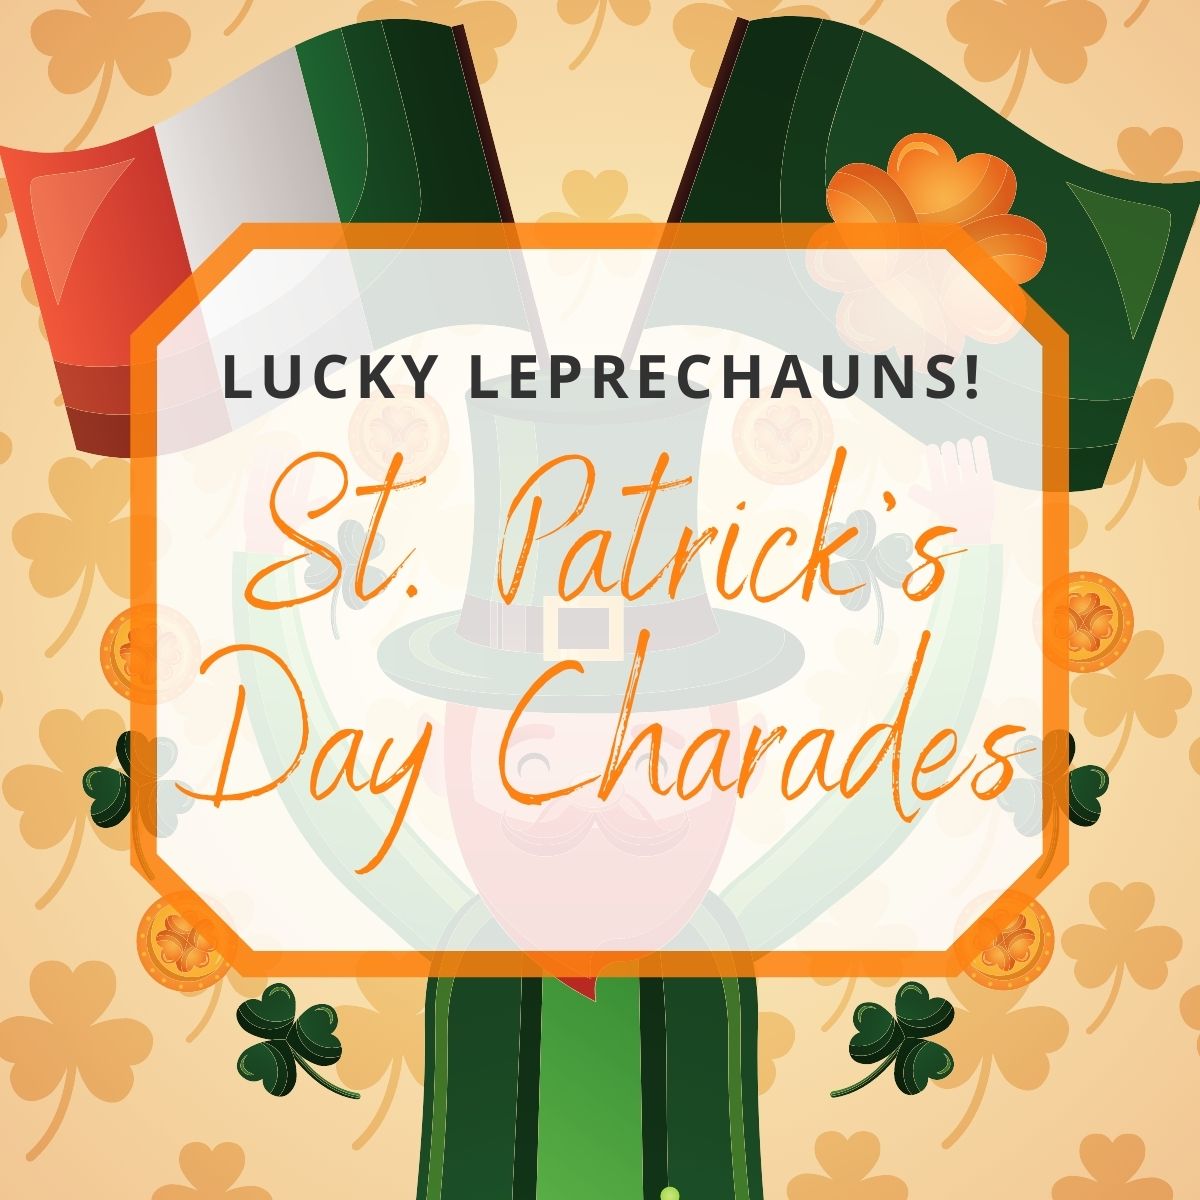 st. patrick's day charades featured image